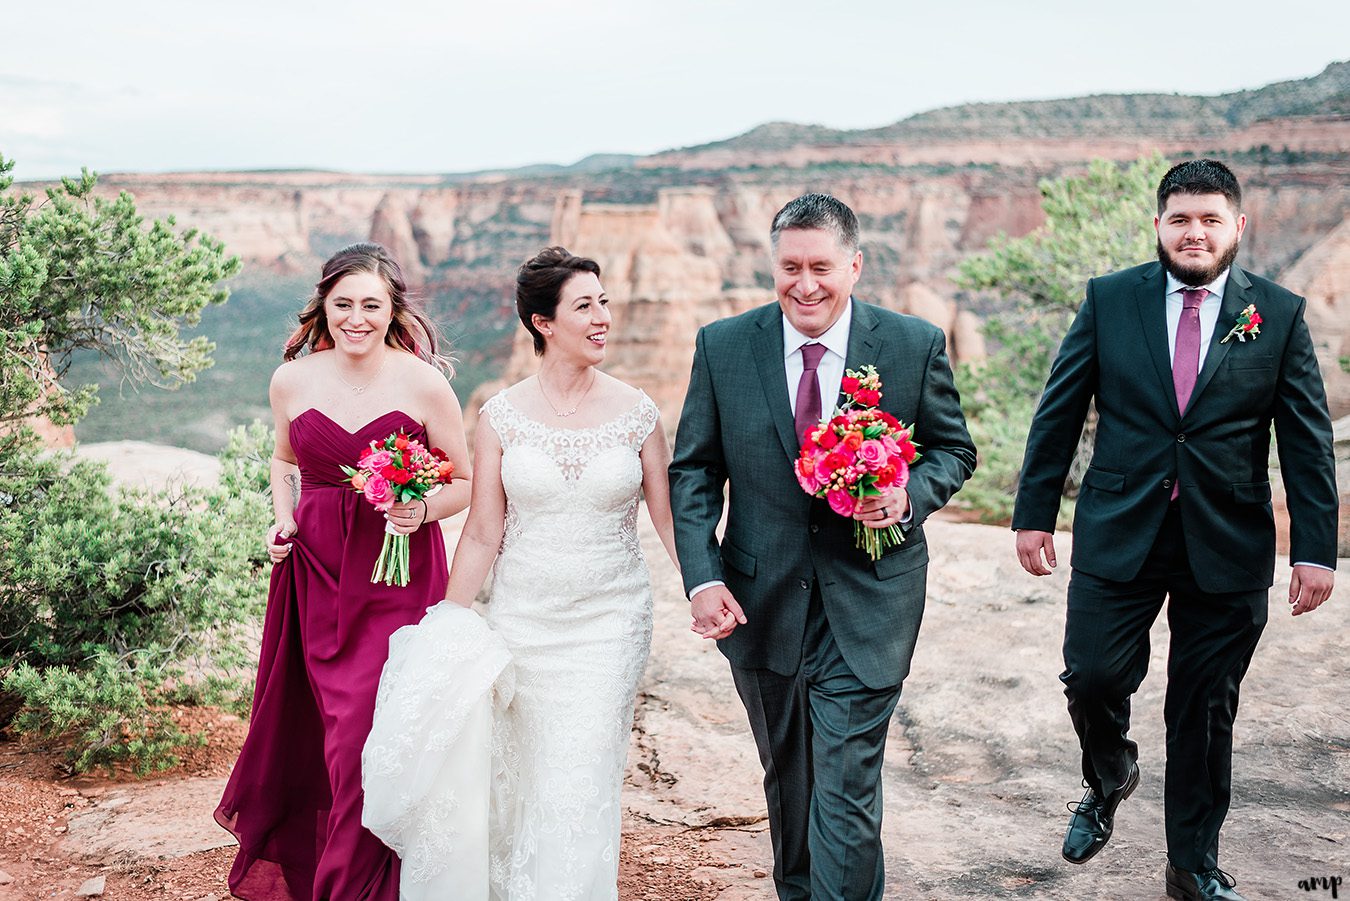 Wedding party walking through the Colorado National Monument in Grand Junction